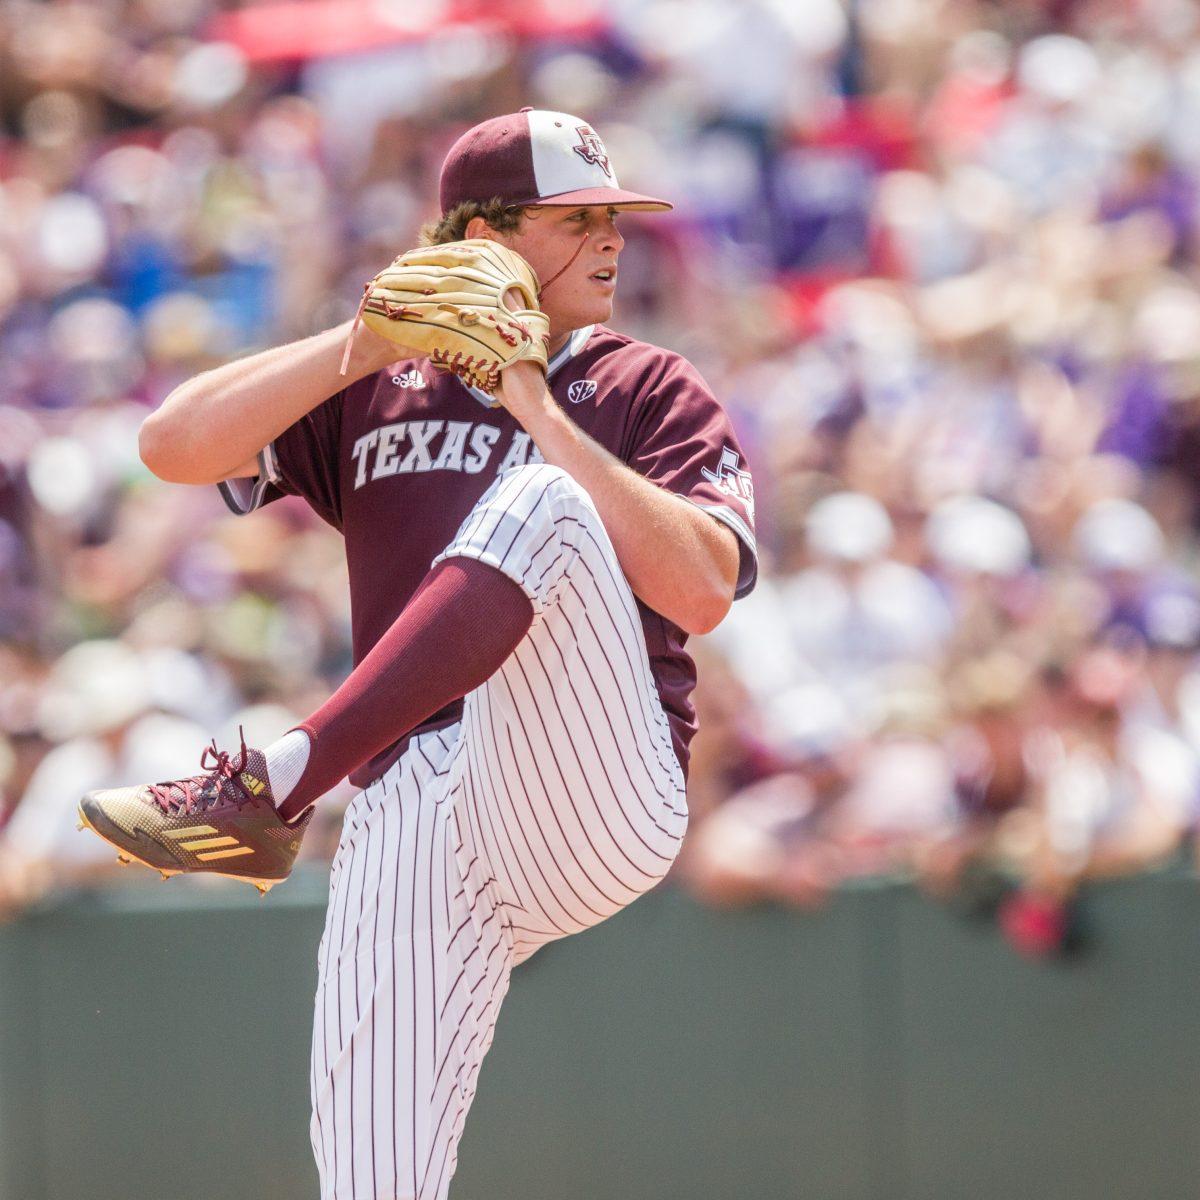 Grayson+Long+winds+up+for+a+pitch+against+TCU+during+the+first+game+at+super+regionals+on+Saturday%2C+June+6th.%26%23160%3B